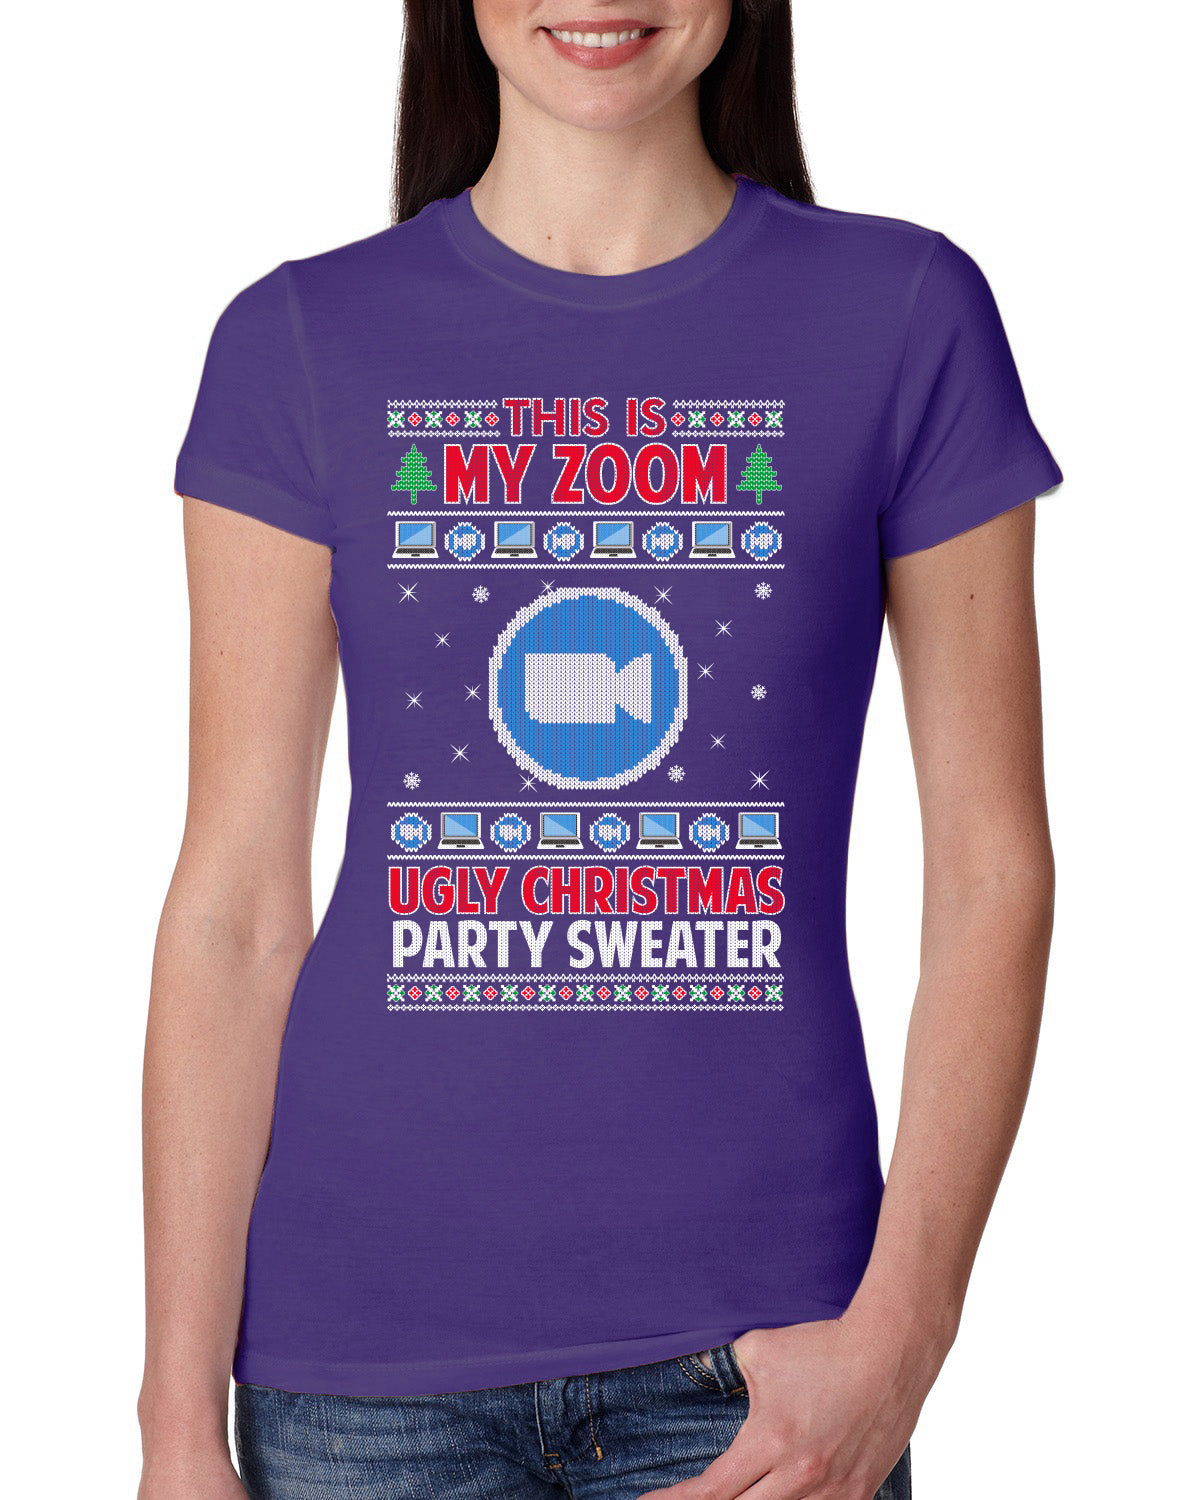 This Is My Zoom Ugly Christmas Party Sweater Ugly Christmas Sweater Womens Slim Fit Junior Tee